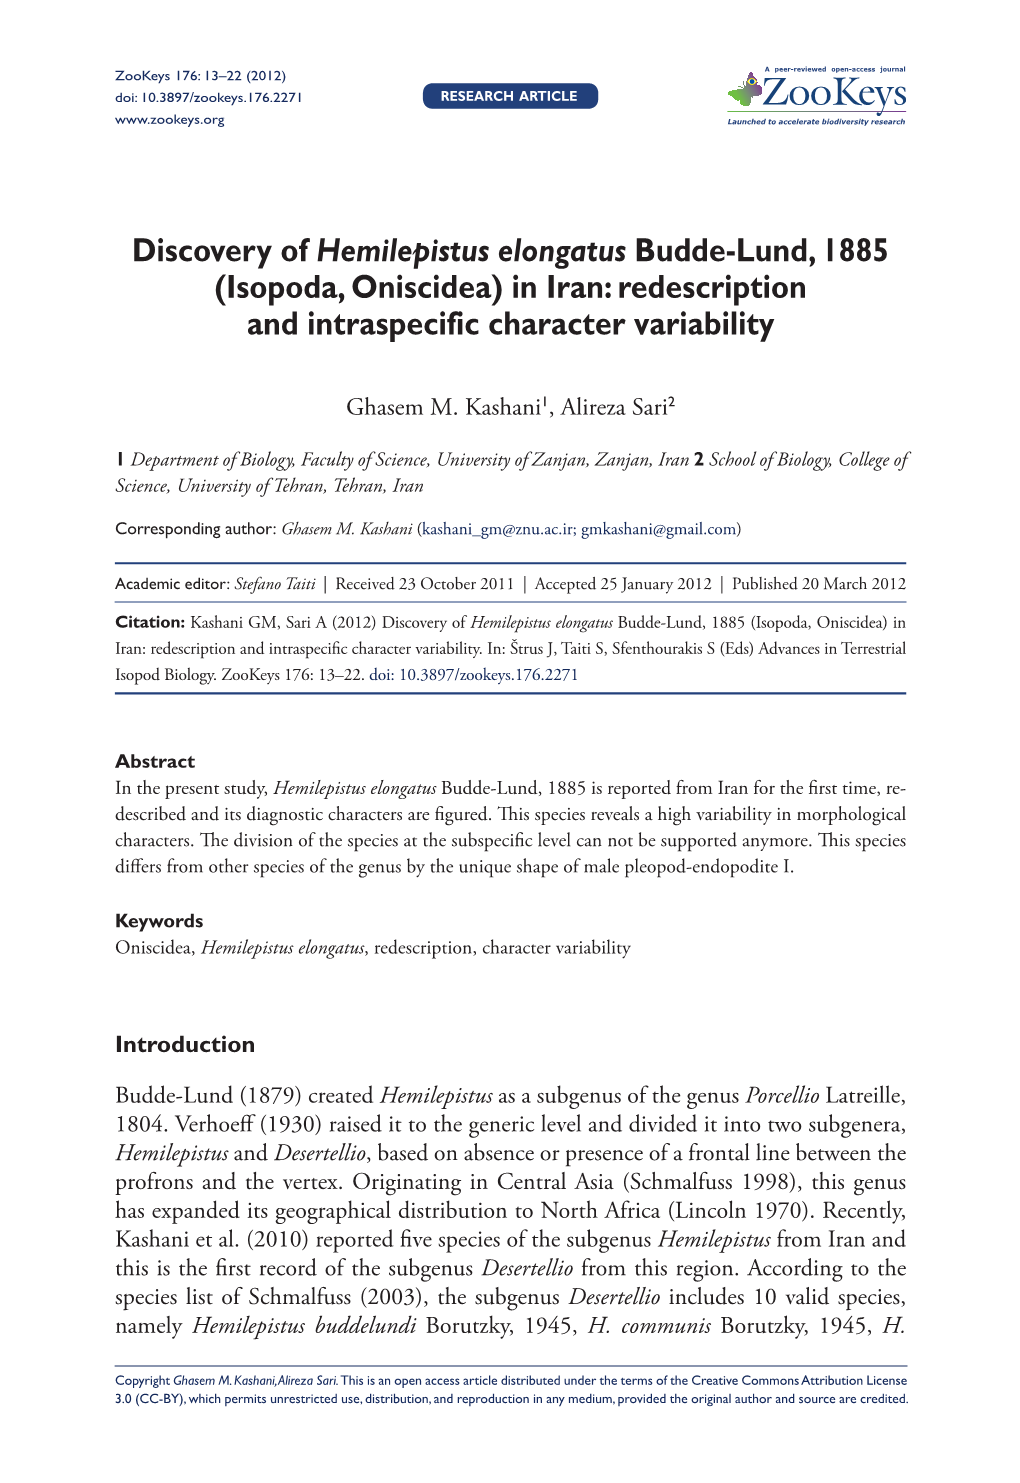 Discovery of Hemilepistus Elongatus Budde-Lund, 1885 (Isopoda, Oniscidea) in Iran: Redescription and Intraspecific Character Variability